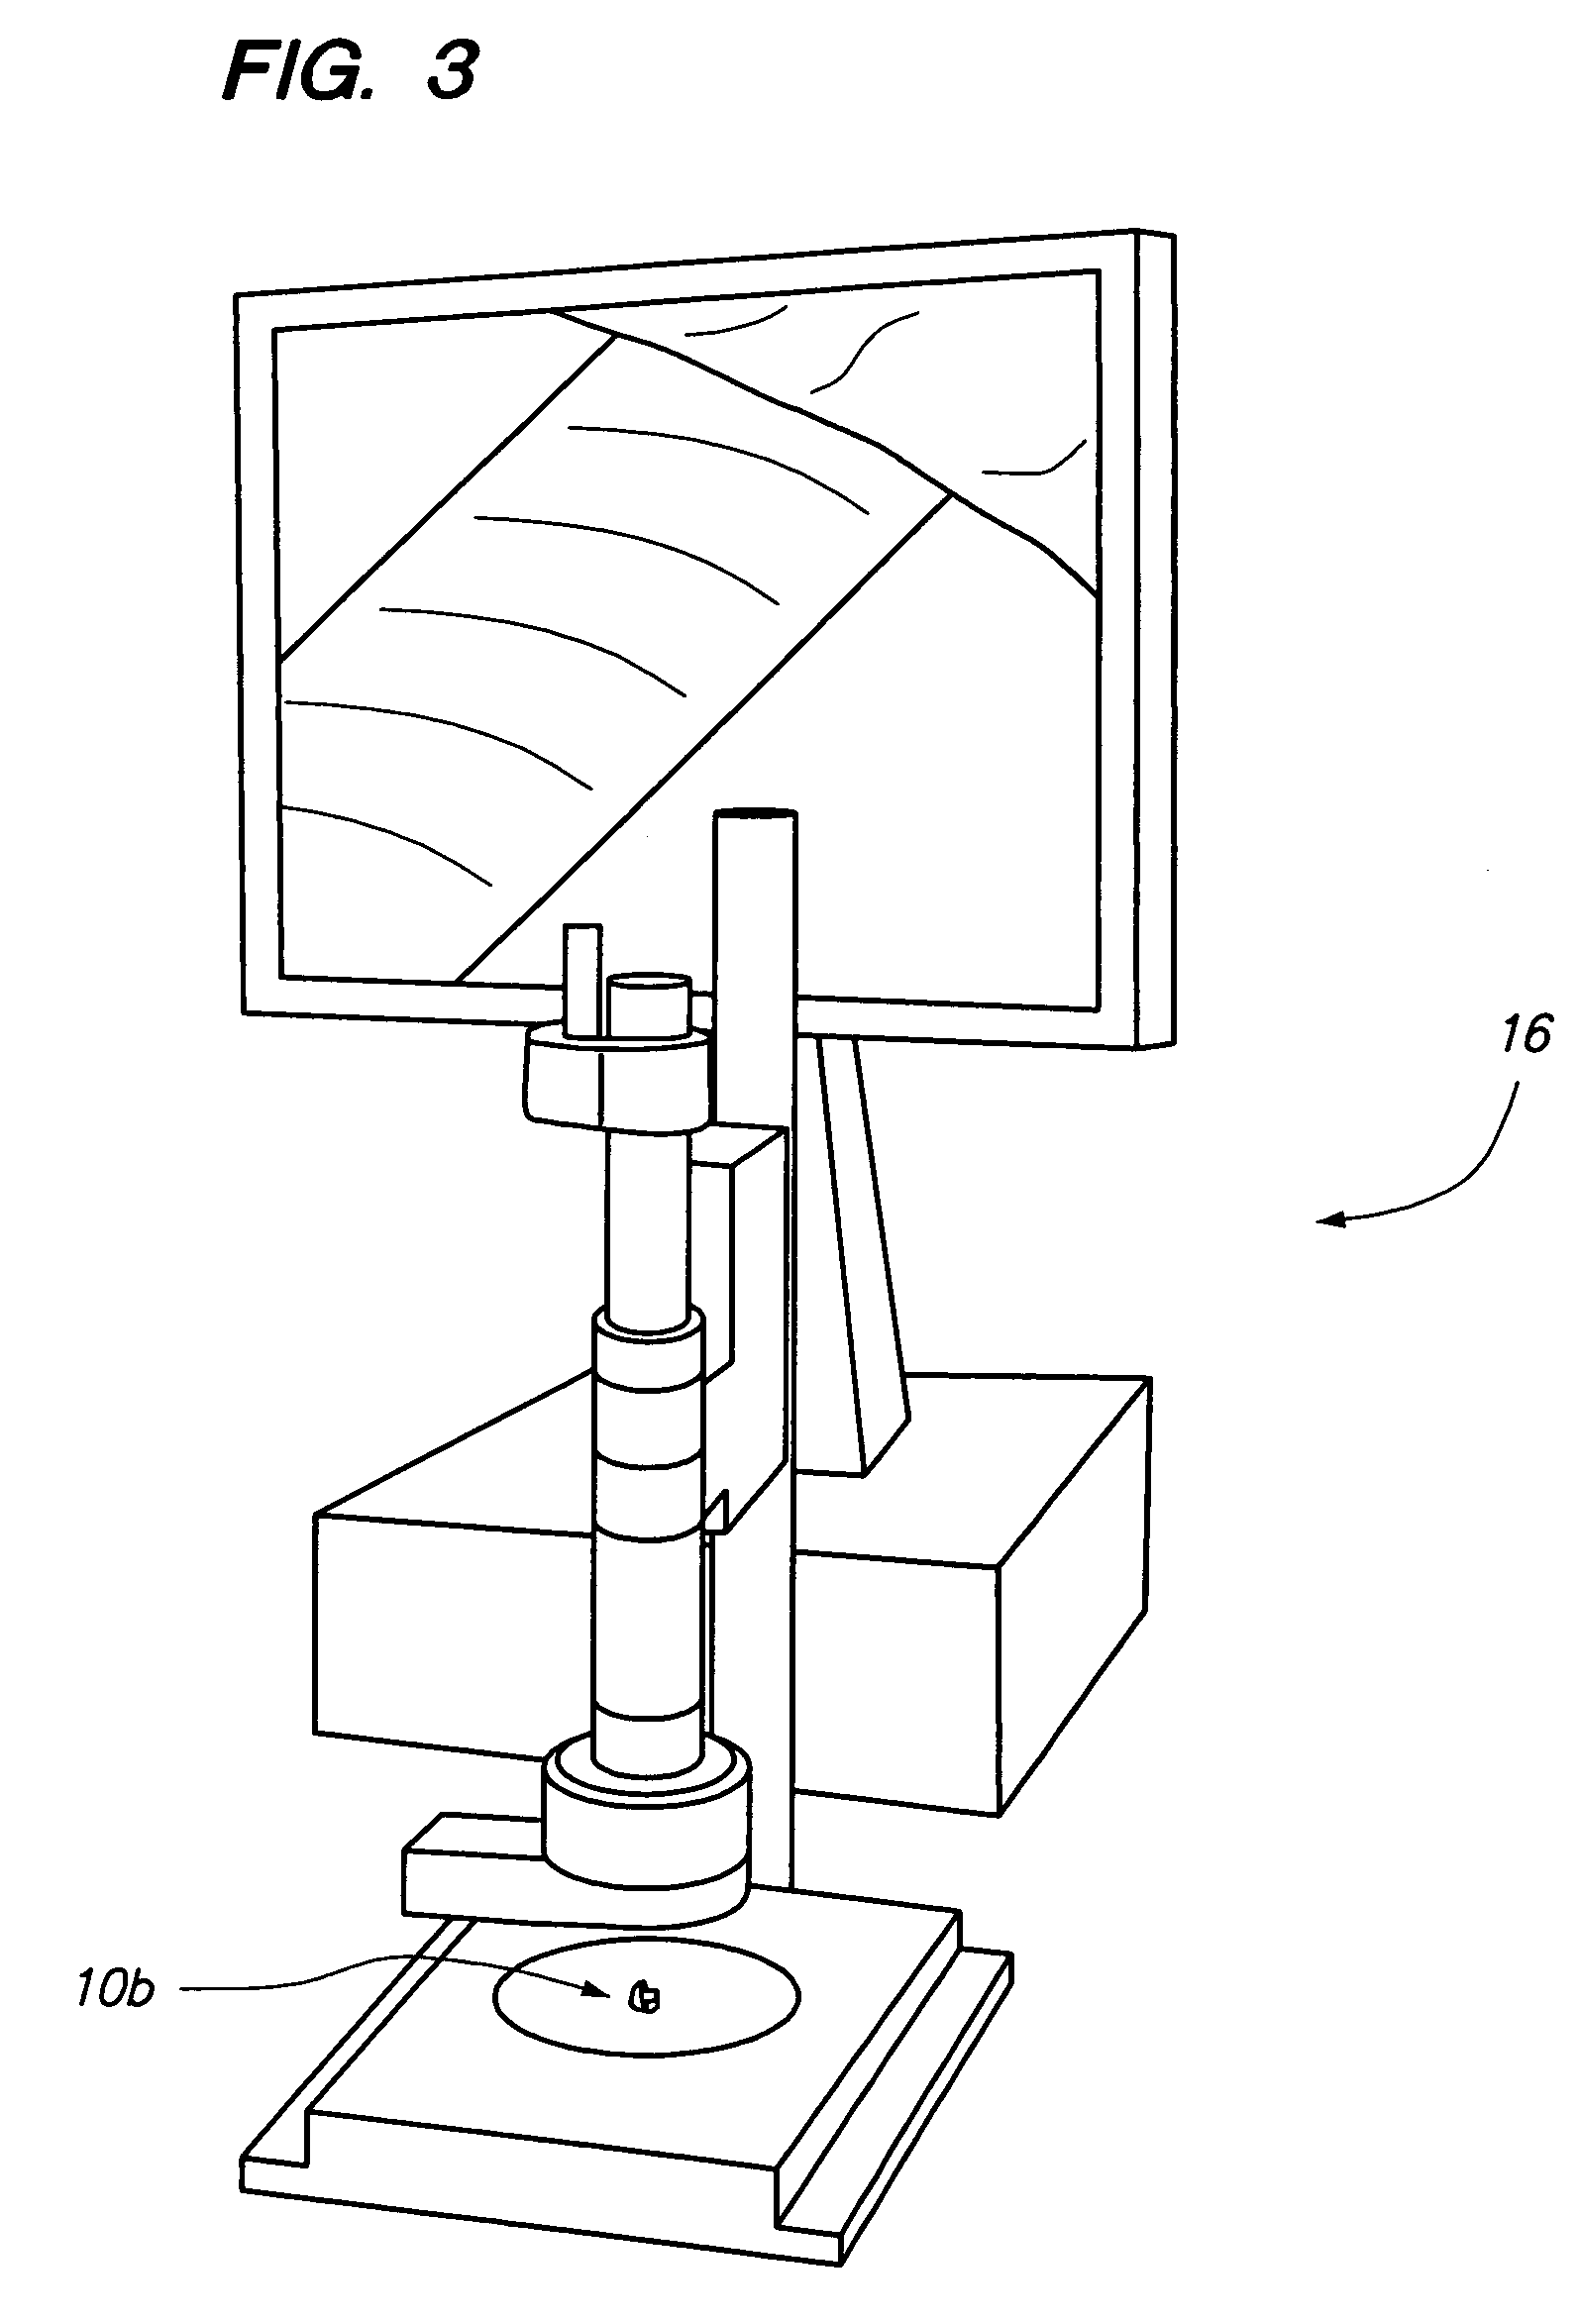 Method for surface replication via thermoplastic media